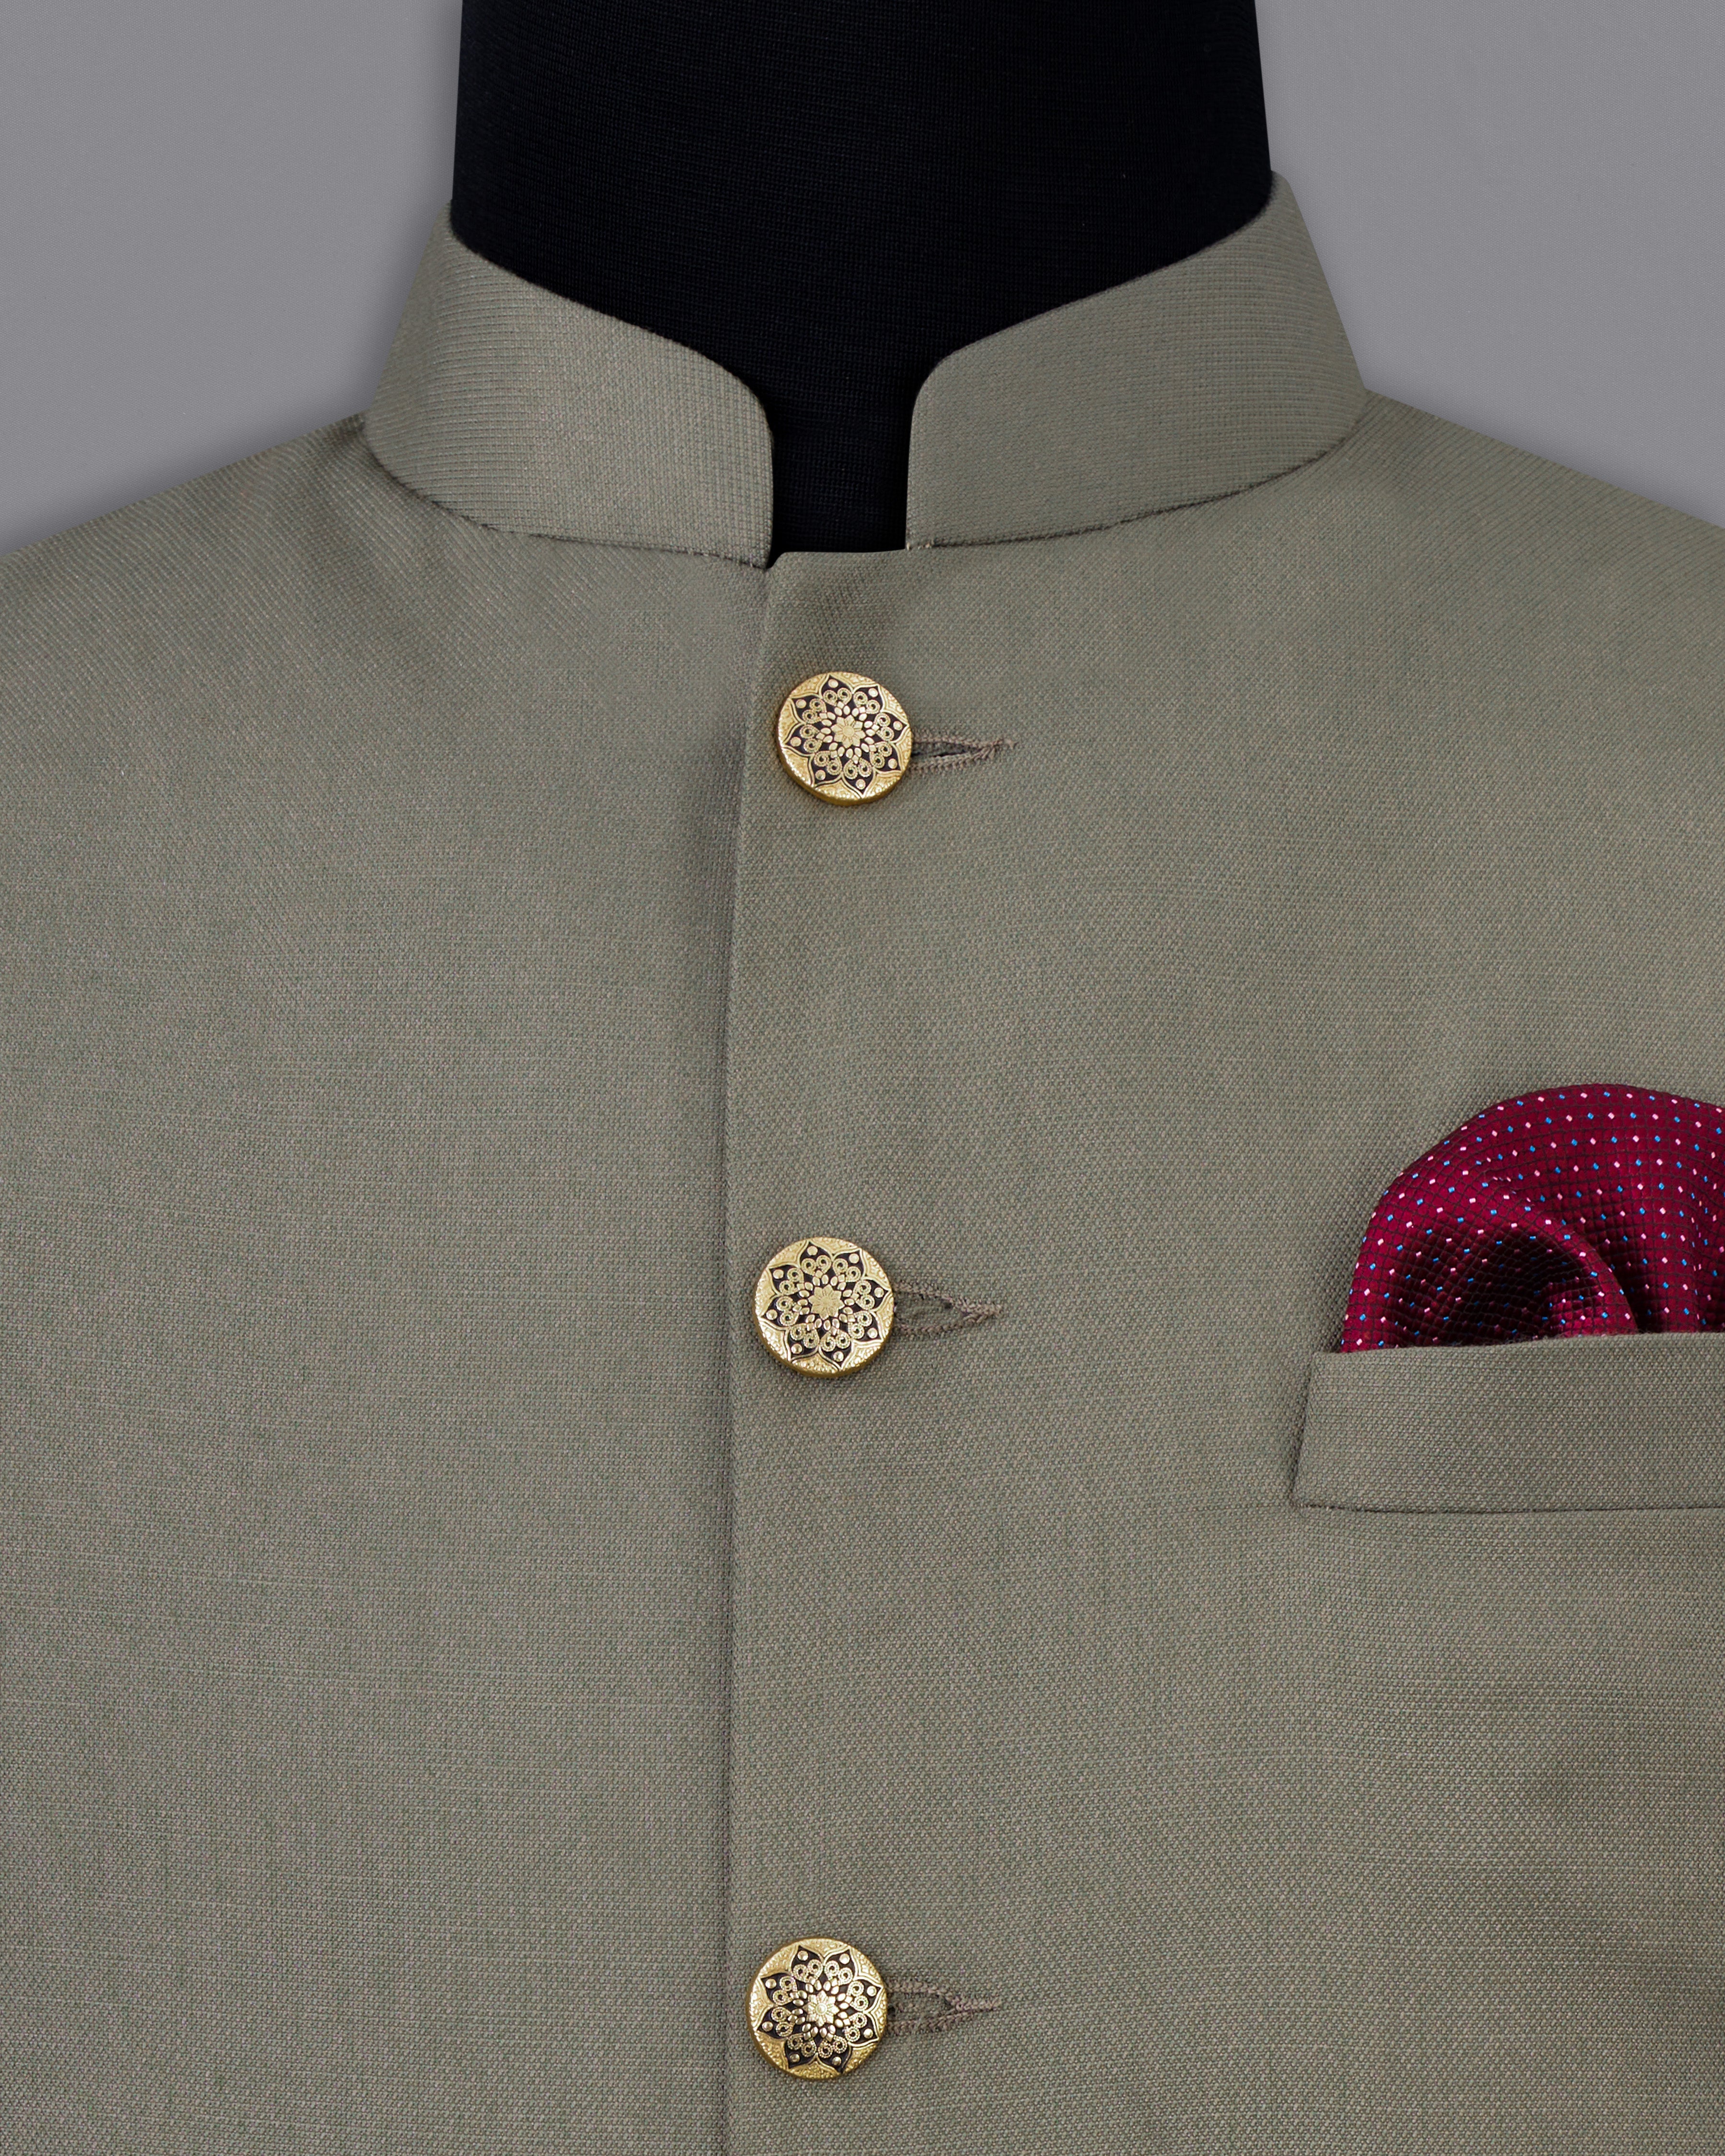 Sandstone Brown Cross Buttoned Bandhgala Suit ST2503-CBG2-36, ST2503-CBG2-38, ST2503-CBG2-40, ST2503-CBG2-42, ST2503-CBG2-44, ST2503-CBG2-46, ST2503-CBG2-48, ST2503-CBG2-50, ST2503-CBG2-52, ST2503-CBG2-54, ST2503-CBG2-56, ST2503-CBG2-58, ST2503-CBG2-60